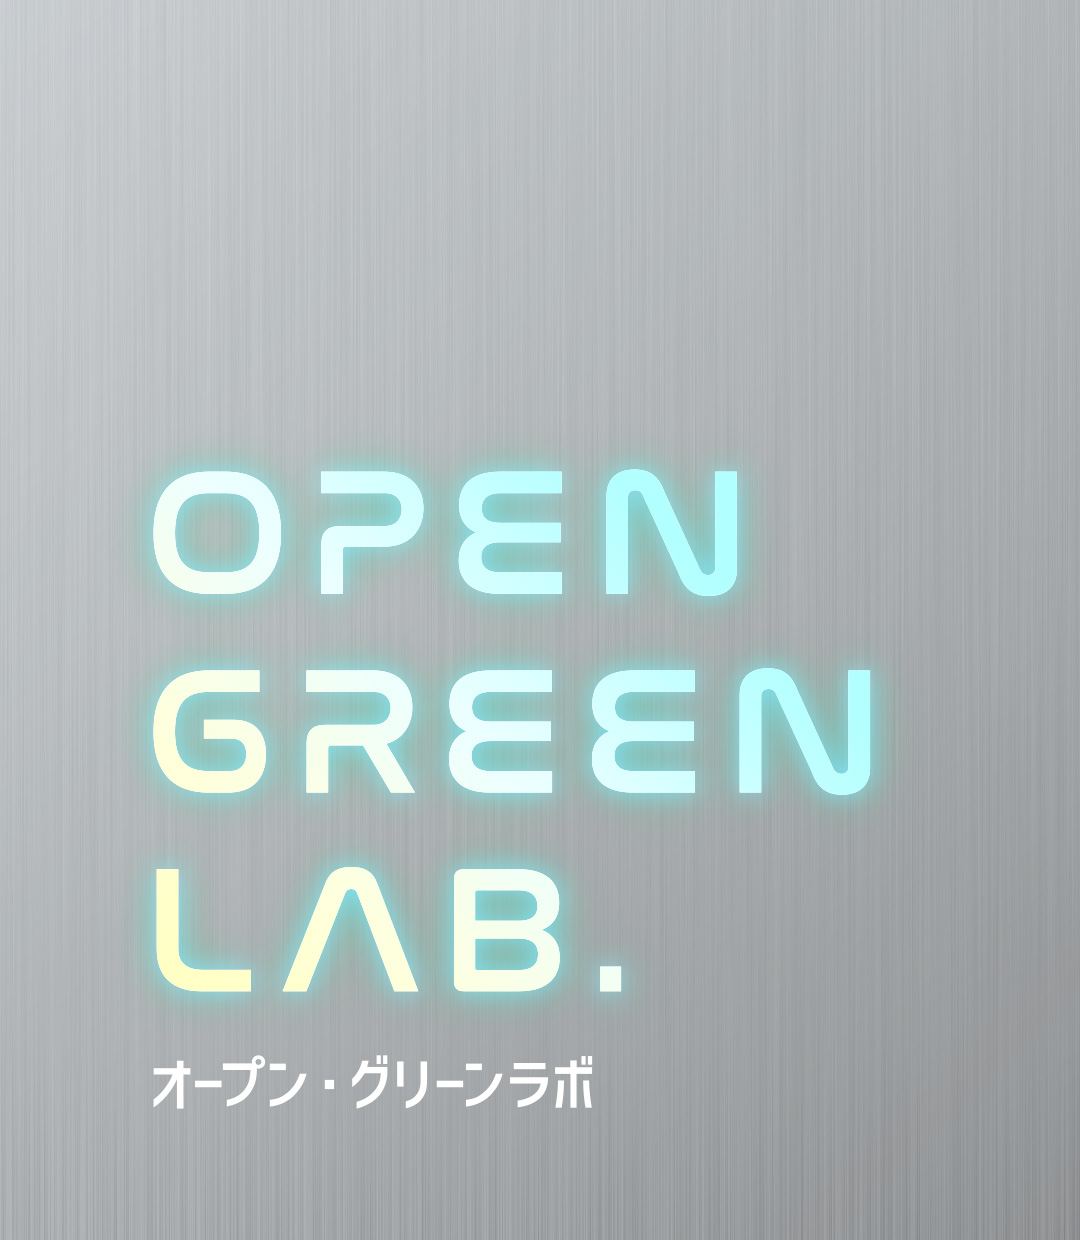 OPEN GREEN LAB: Plants which become red